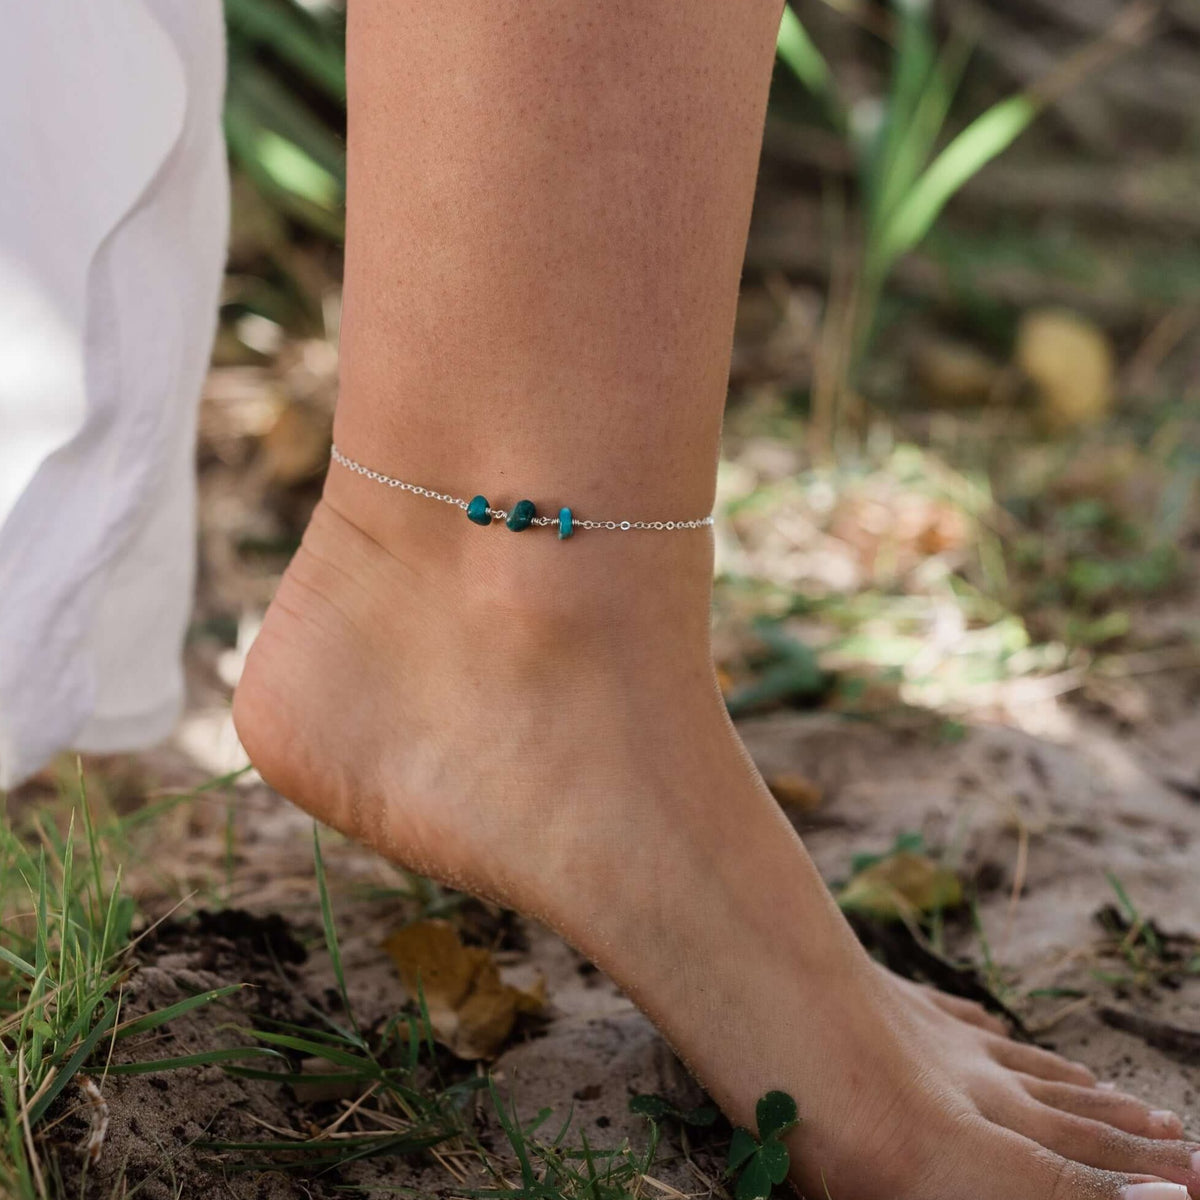 Beaded Chain Anklet - Apatite - Sterling Silver - Luna Tide Handmade Jewellery